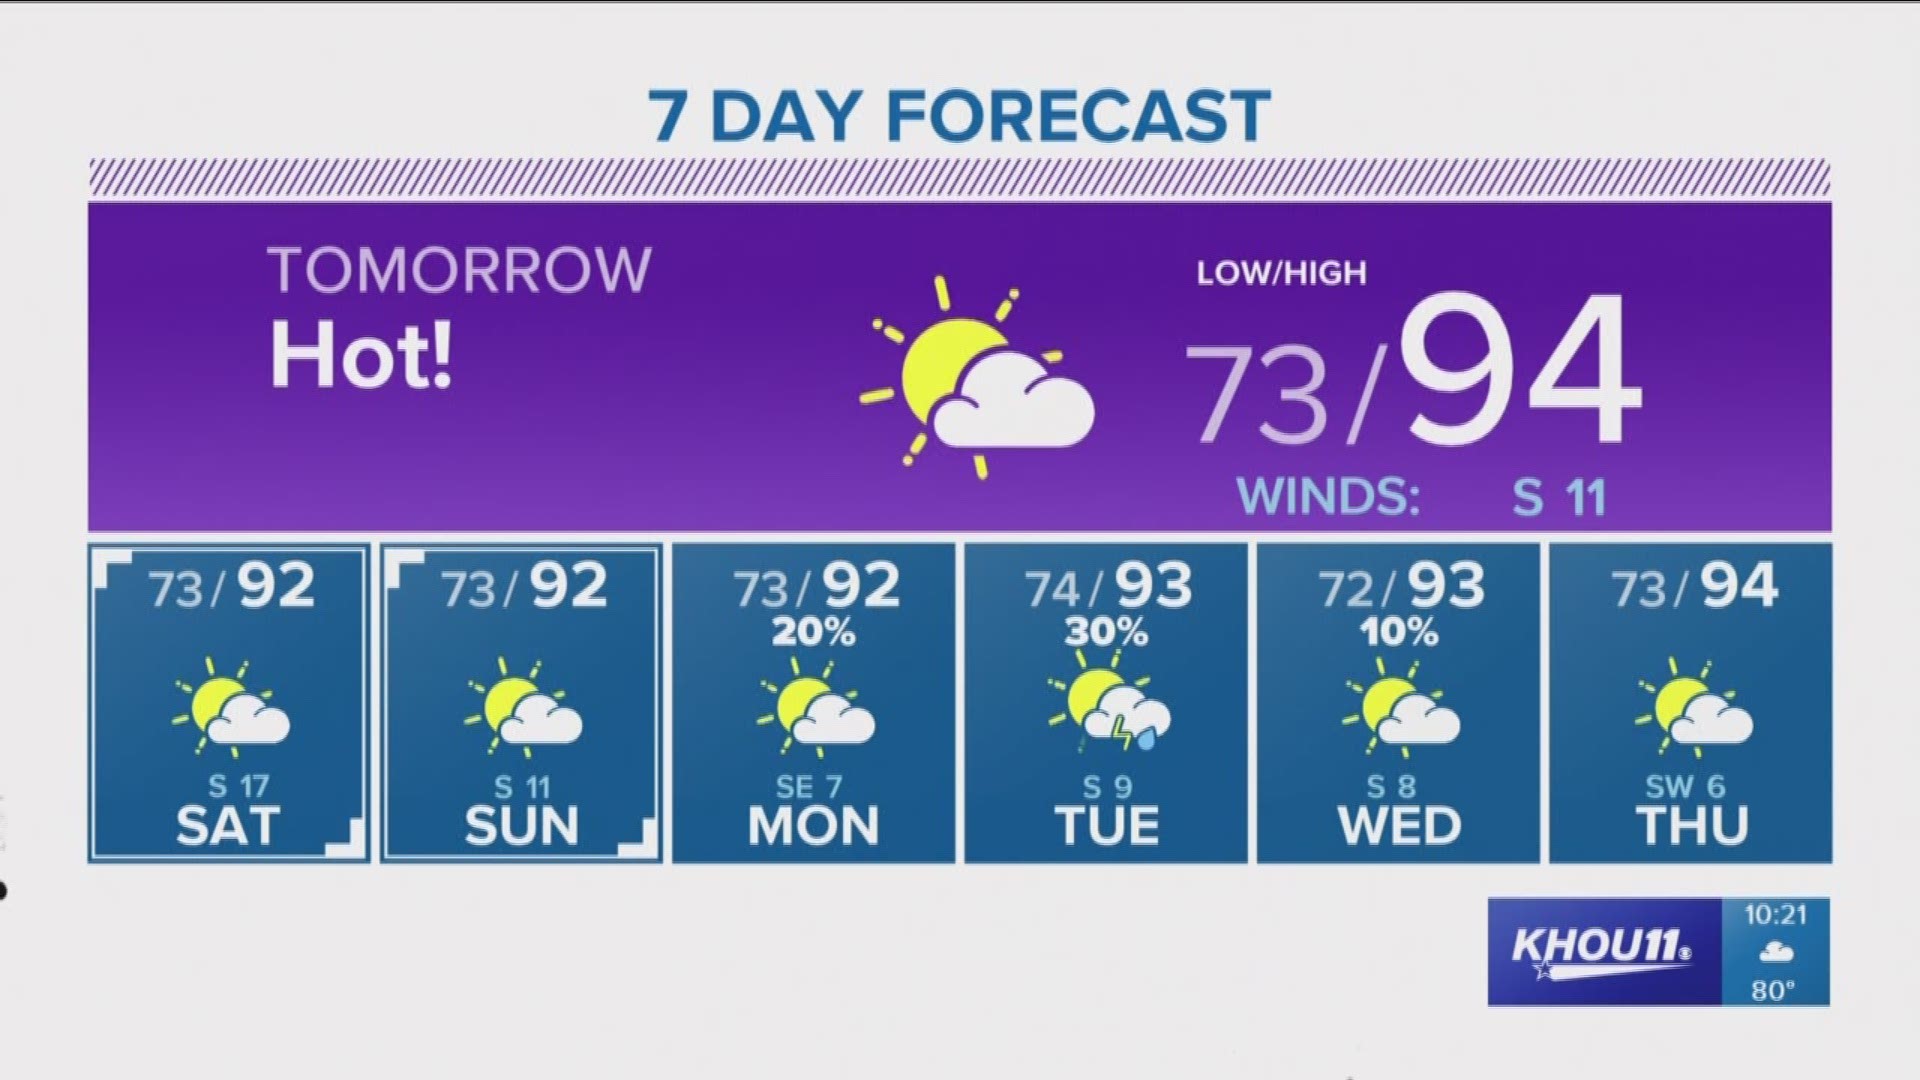 Houston forecast update with David Paul at 10 p.m.